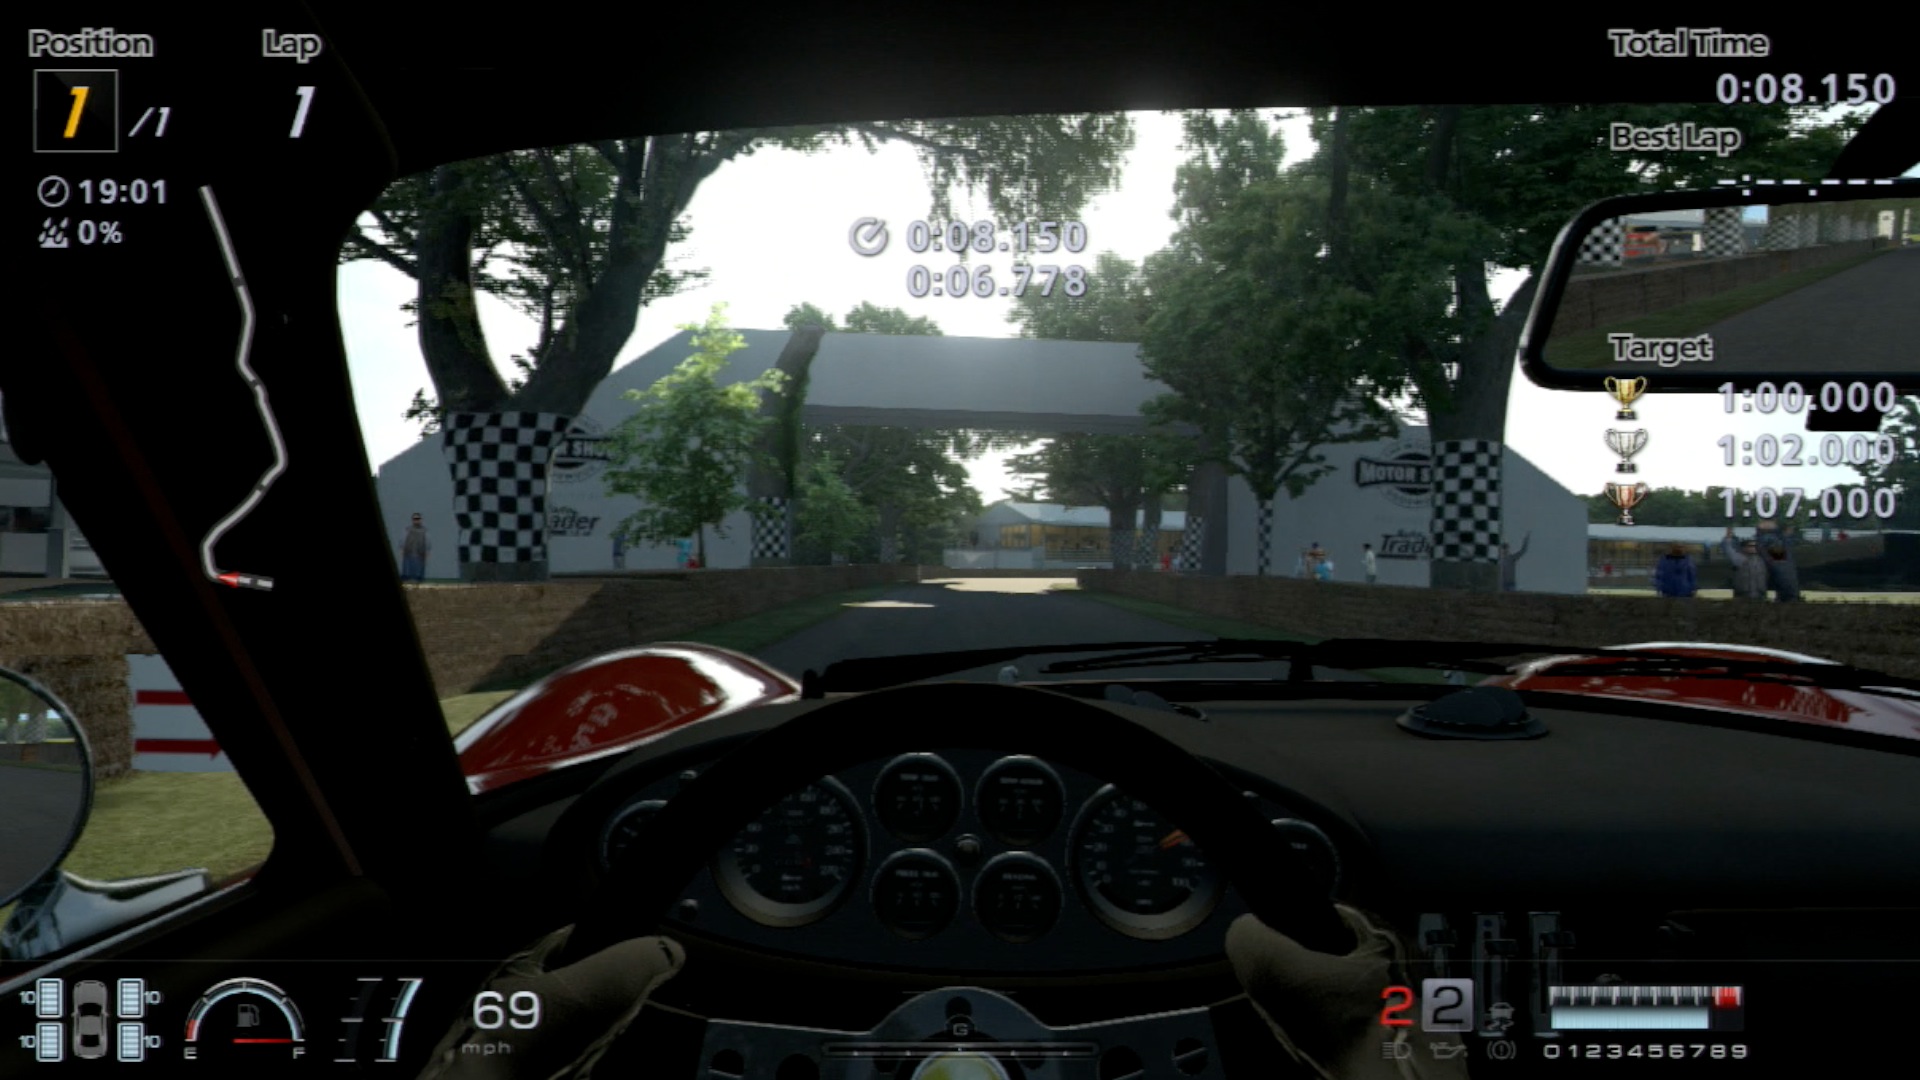 Gran Turismo 6 is Back Online on the PS3 in 2023 And it's fun